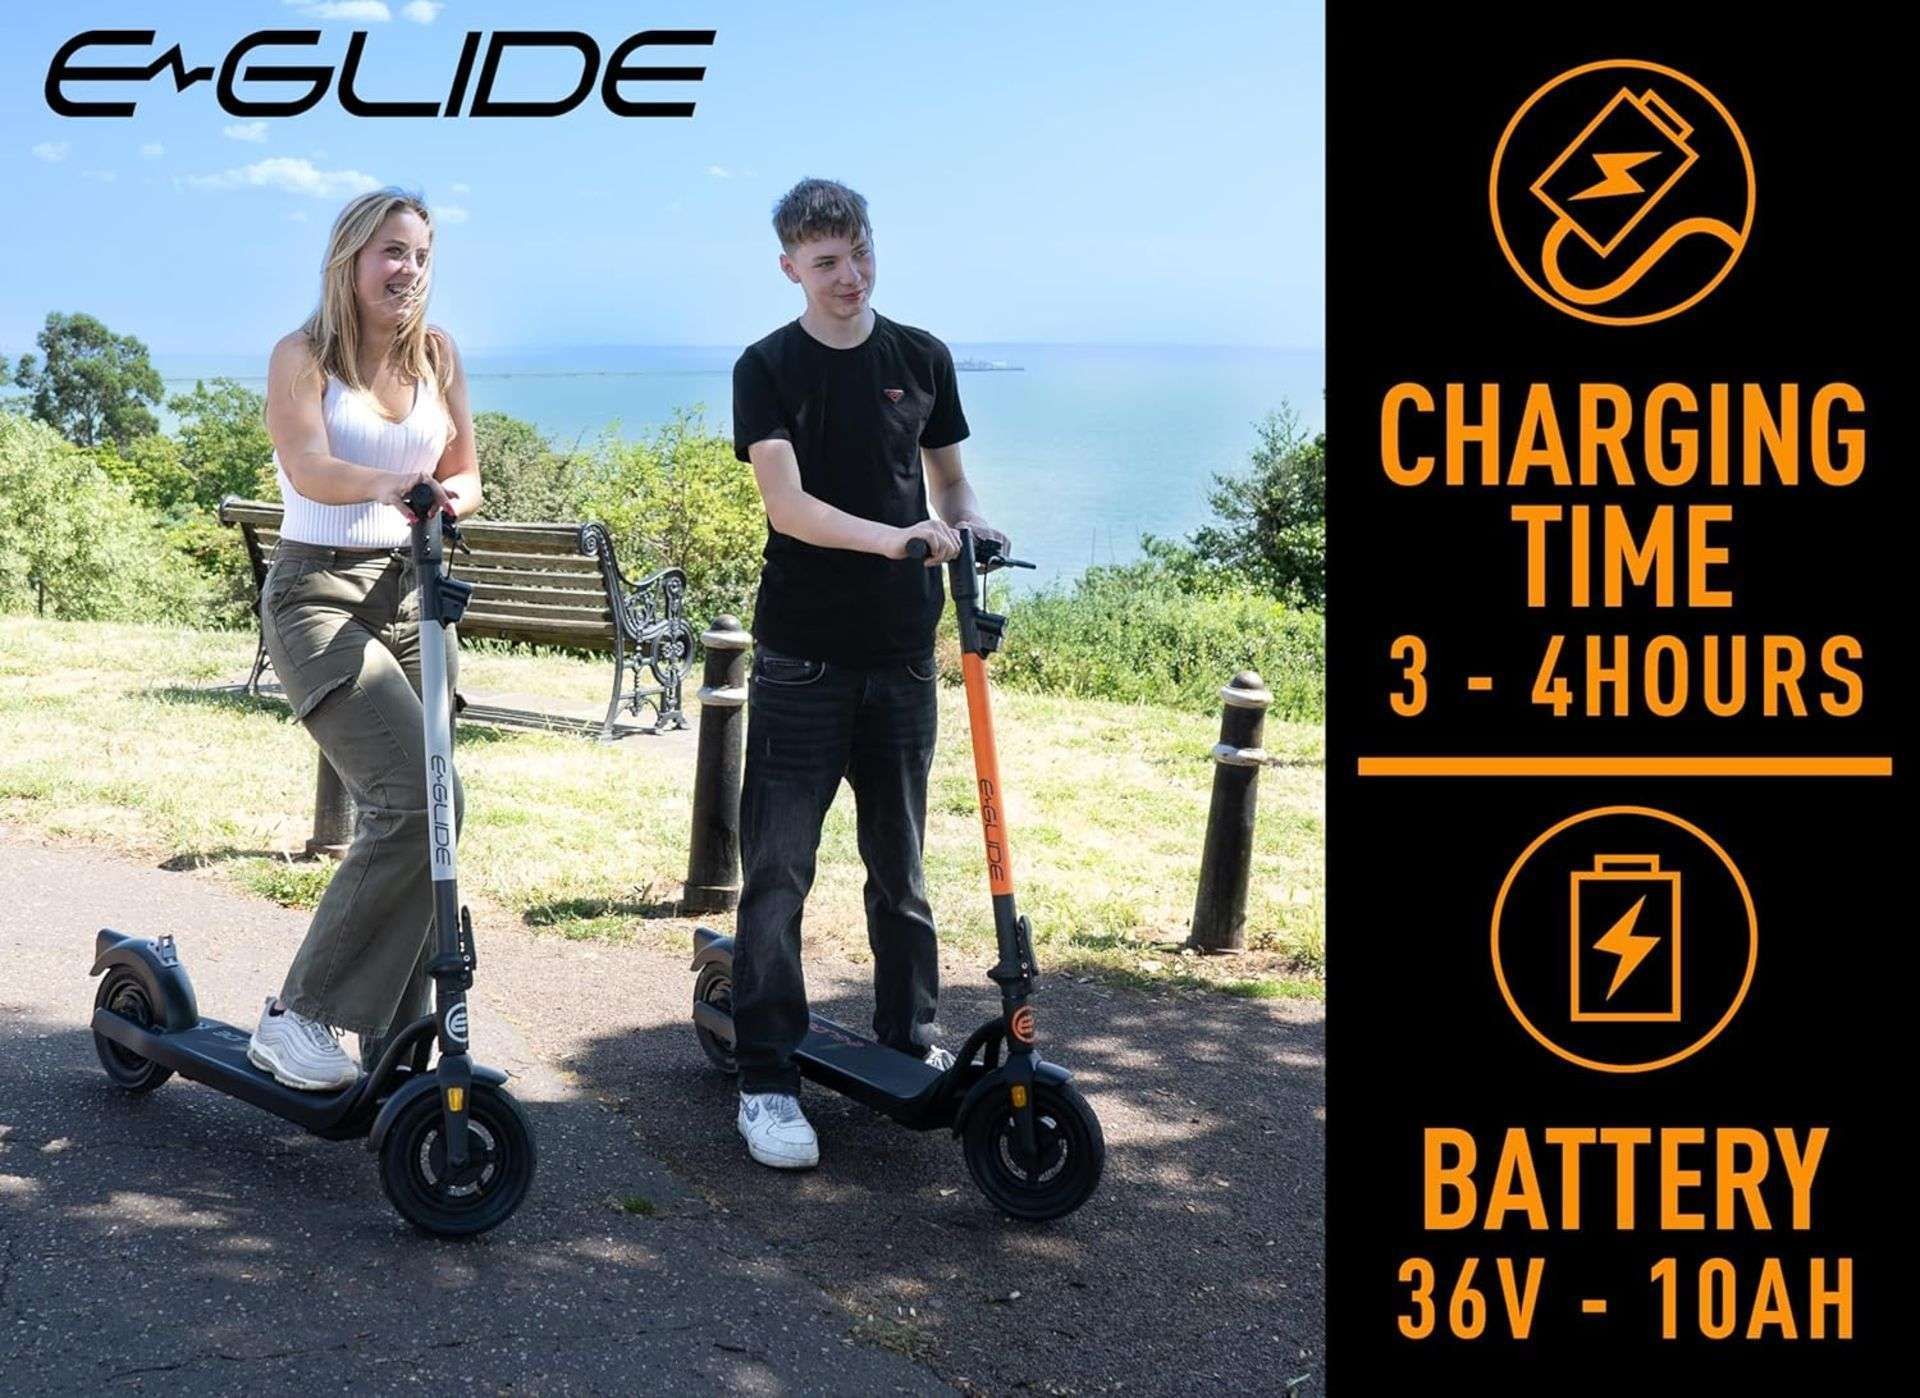 Brand New E-Glide V2 Electric Scooter Grey and Black RRP £599, Introducing a sleek and efficient - Image 4 of 5